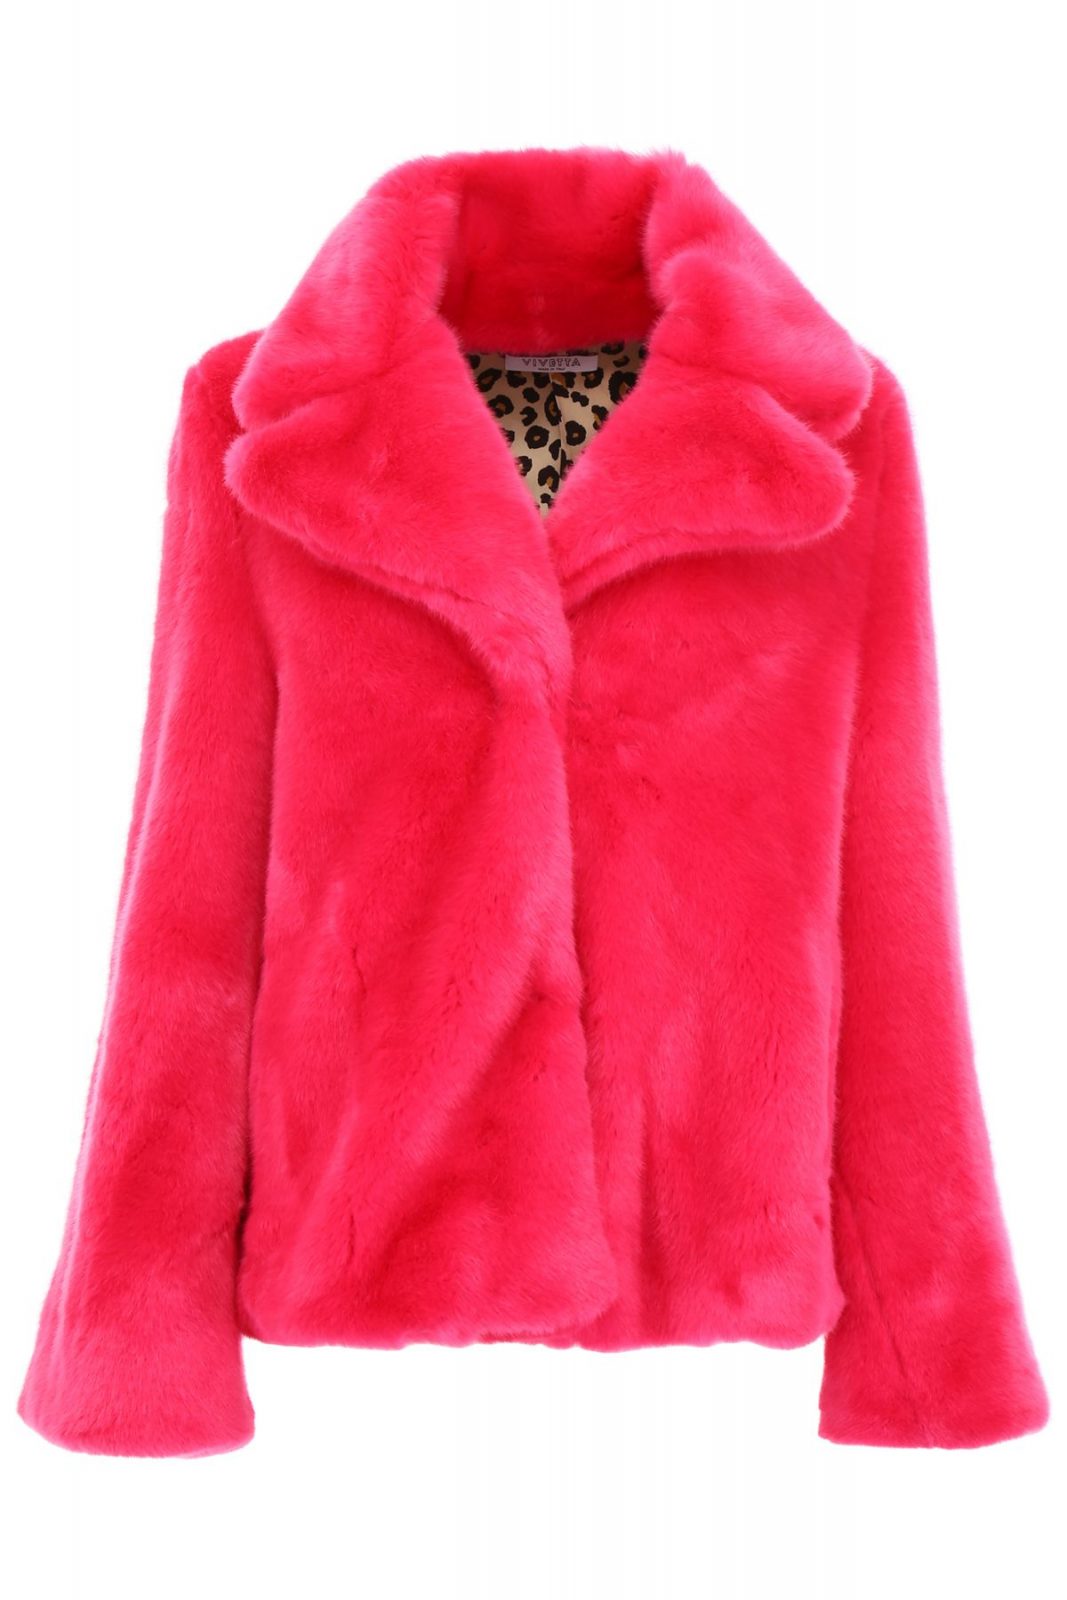 Taylor Swift You Need To Calm Down Pink Fur Coat | Right Jackets